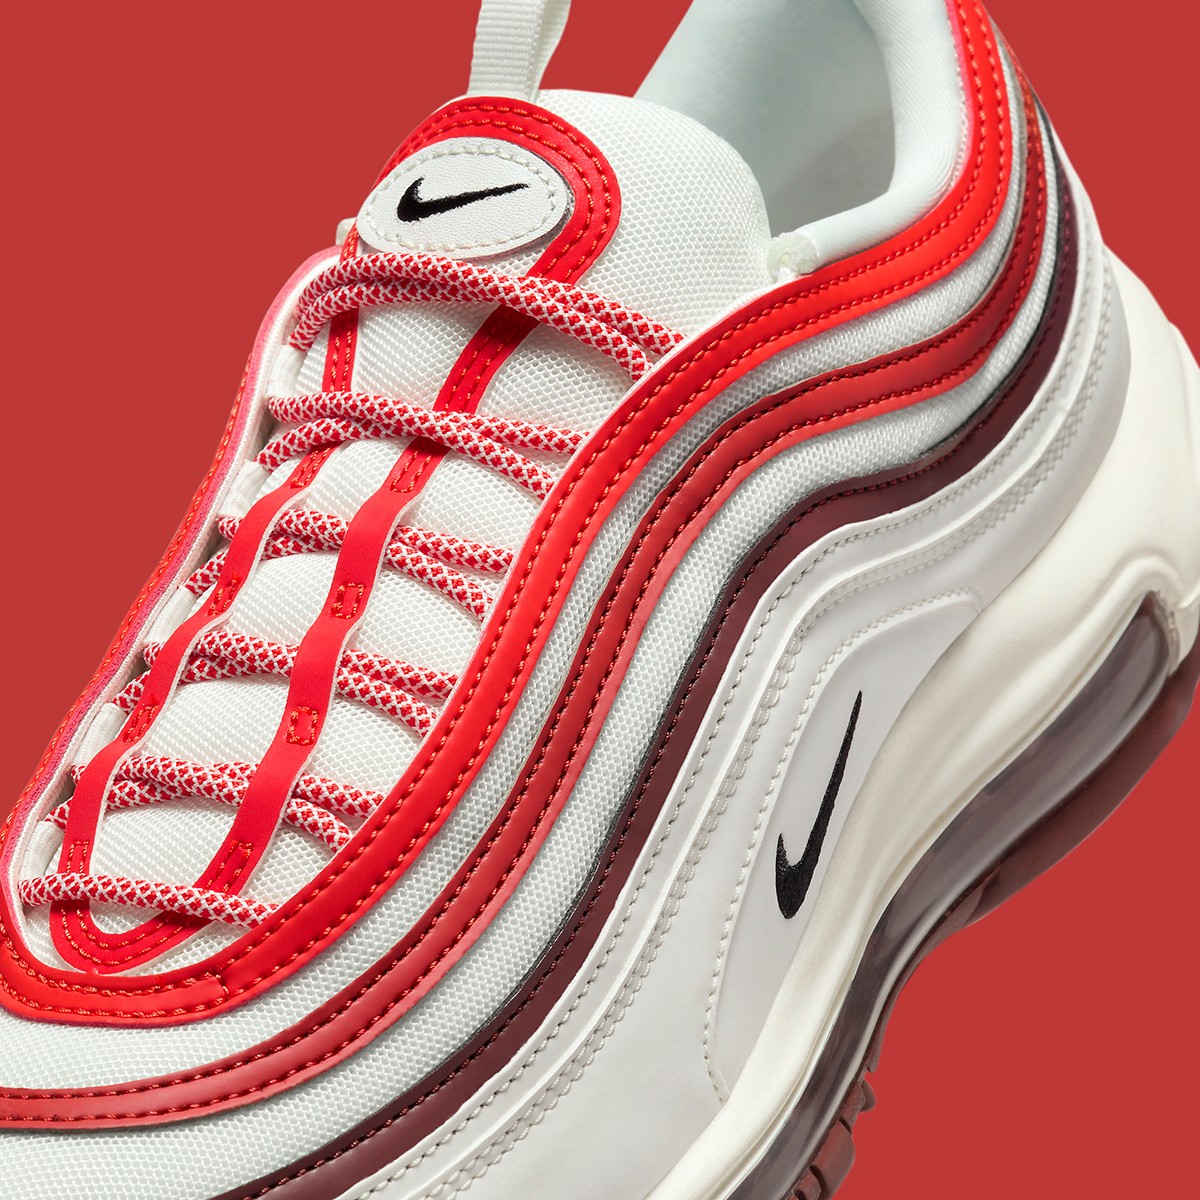 Nike Air Max 97 White Dune Red Fn6957 101 6